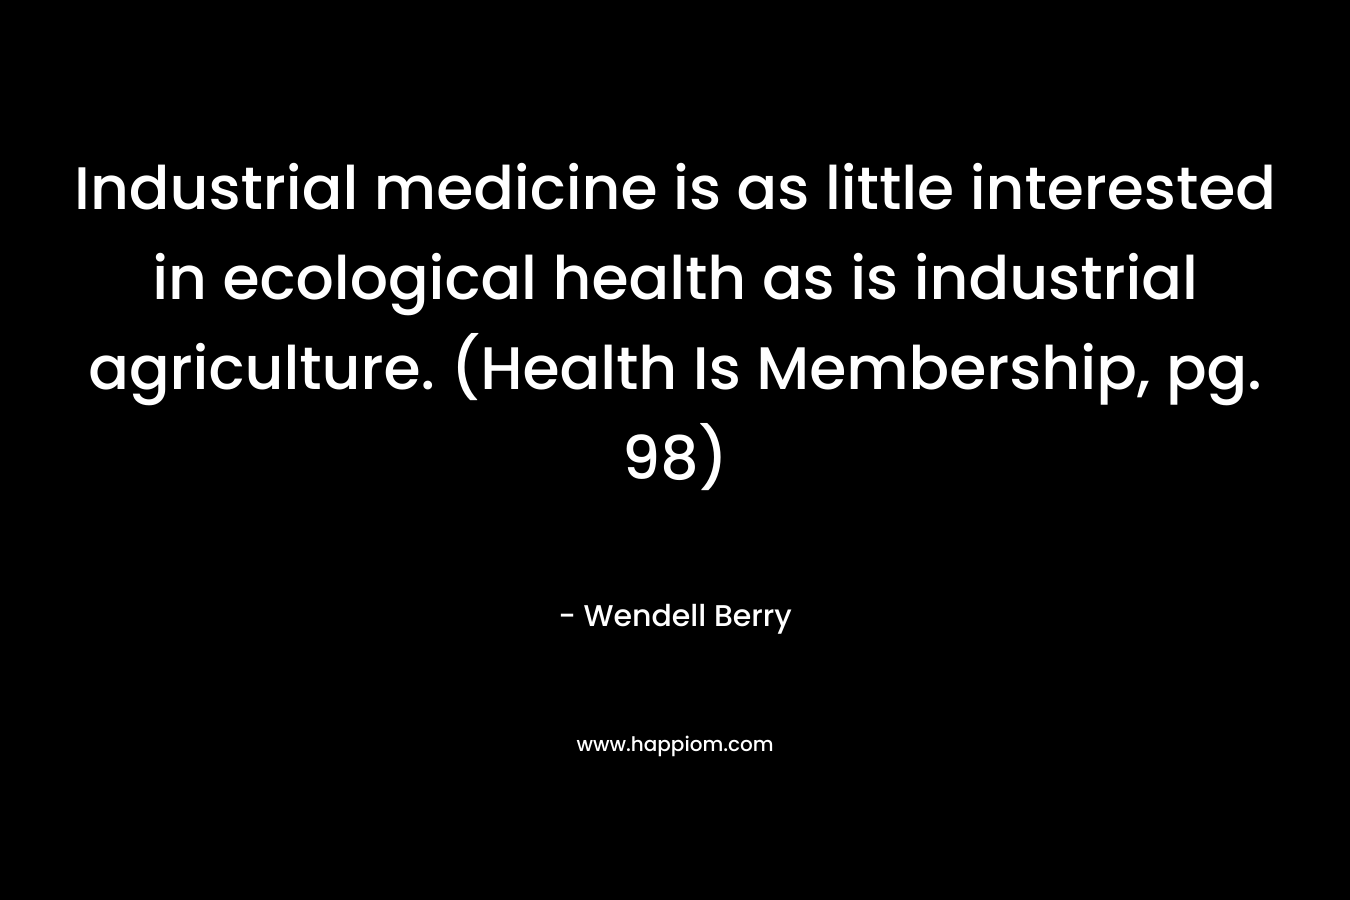 Industrial medicine is as little interested in ecological health as is industrial agriculture. (Health Is Membership, pg. 98) – Wendell Berry